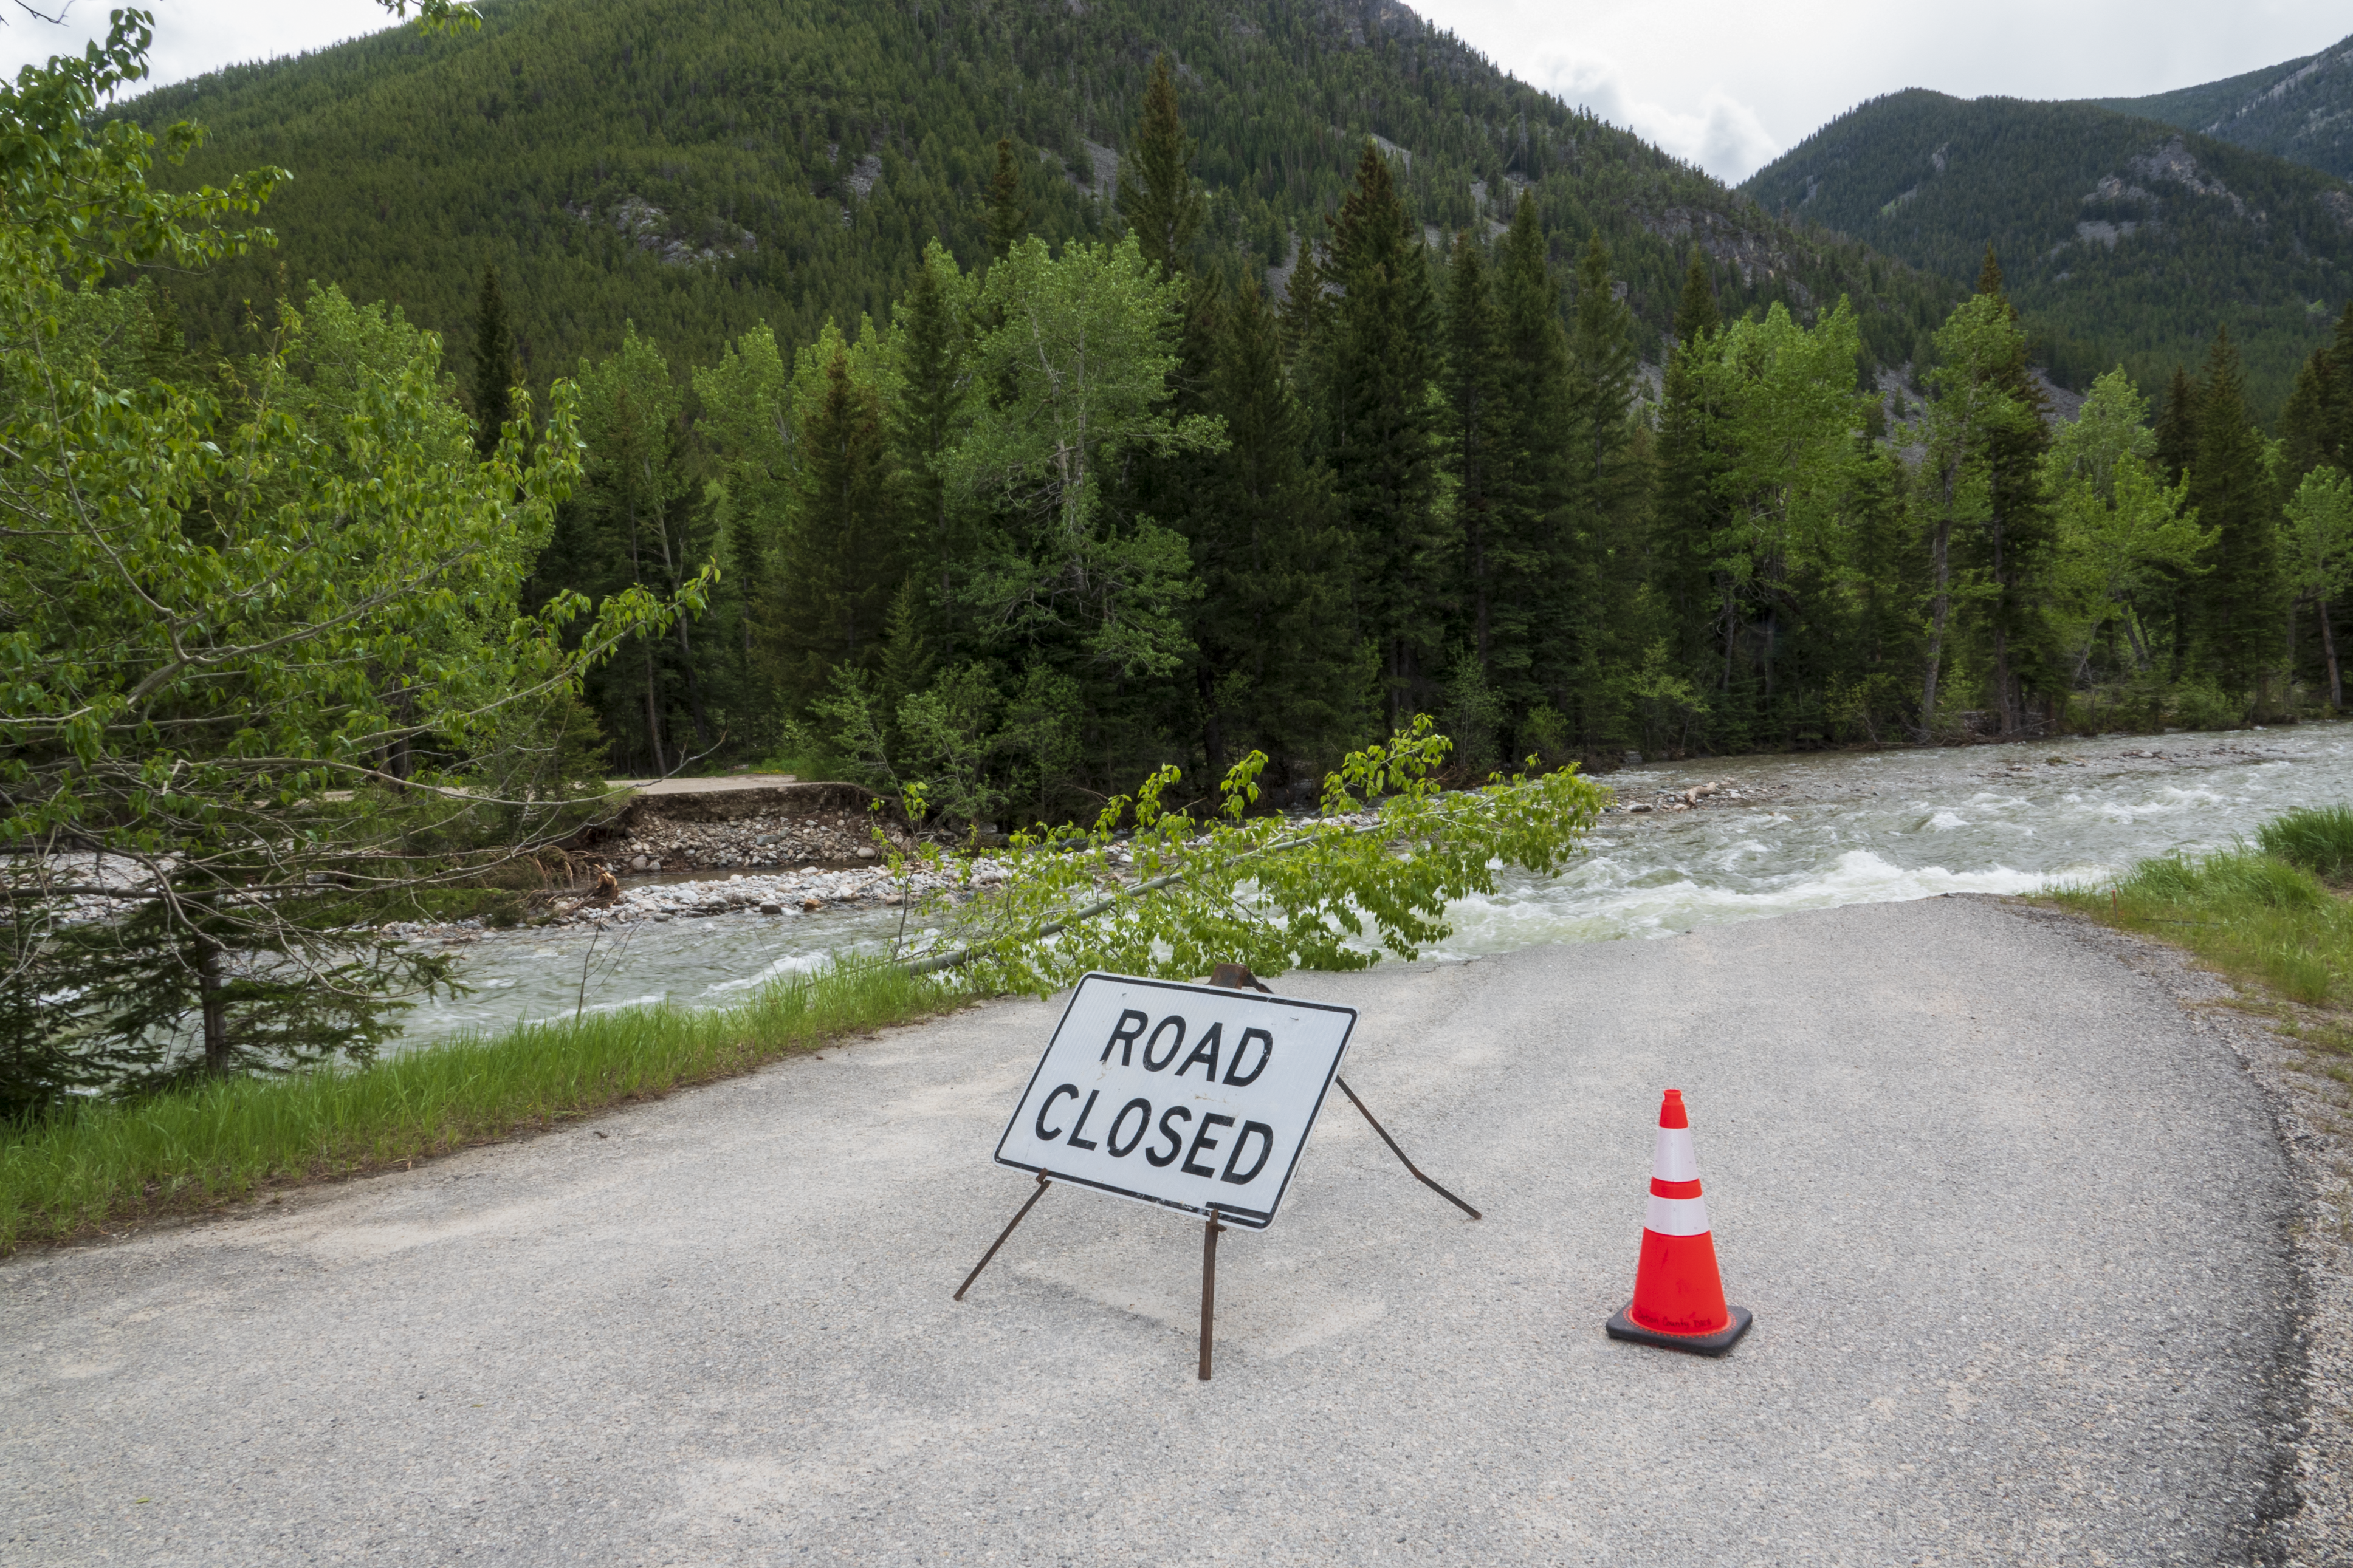 Road closed sign and single orange cone on pavement, broken pavement along both sides of creek running to left of image